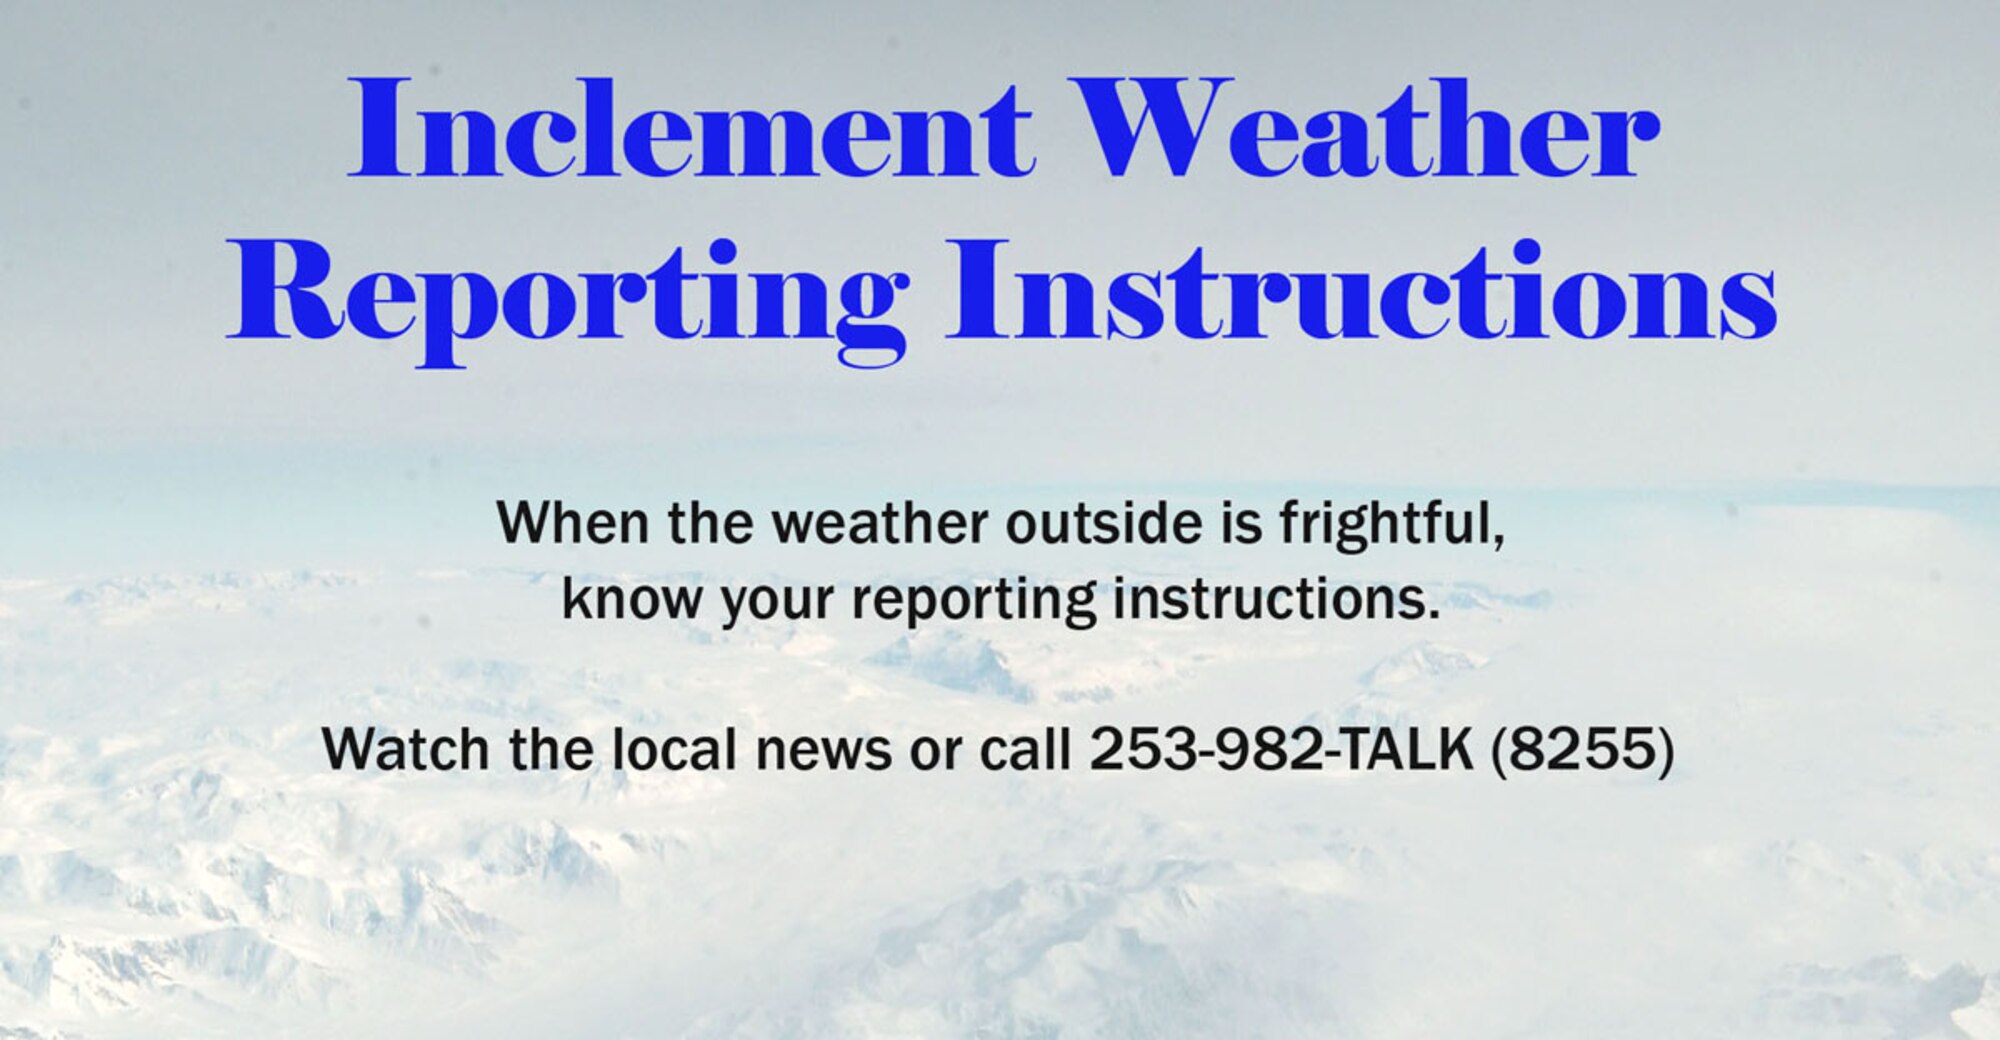 When the weather makes for hazardous driving conditions, call the McChord Straight Talk line for reporting instructions. For updated information on changes to reporting instructions, call 253-982-TALK (8255) or check back here at www.446aw.af.mil. 